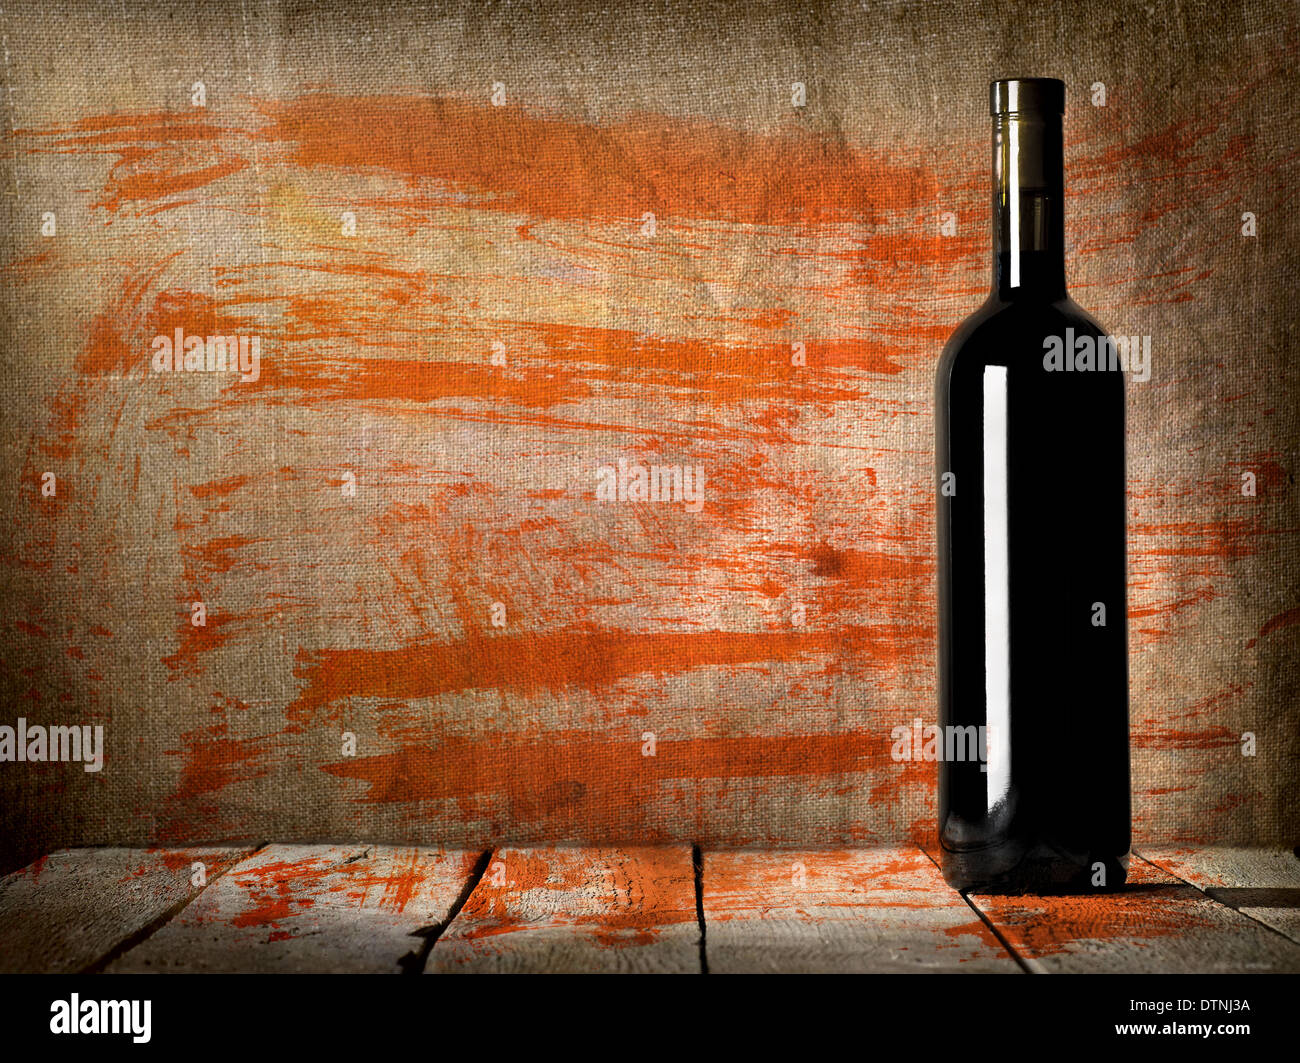 Black bottle of wine on the background of the canvas Stock Photo